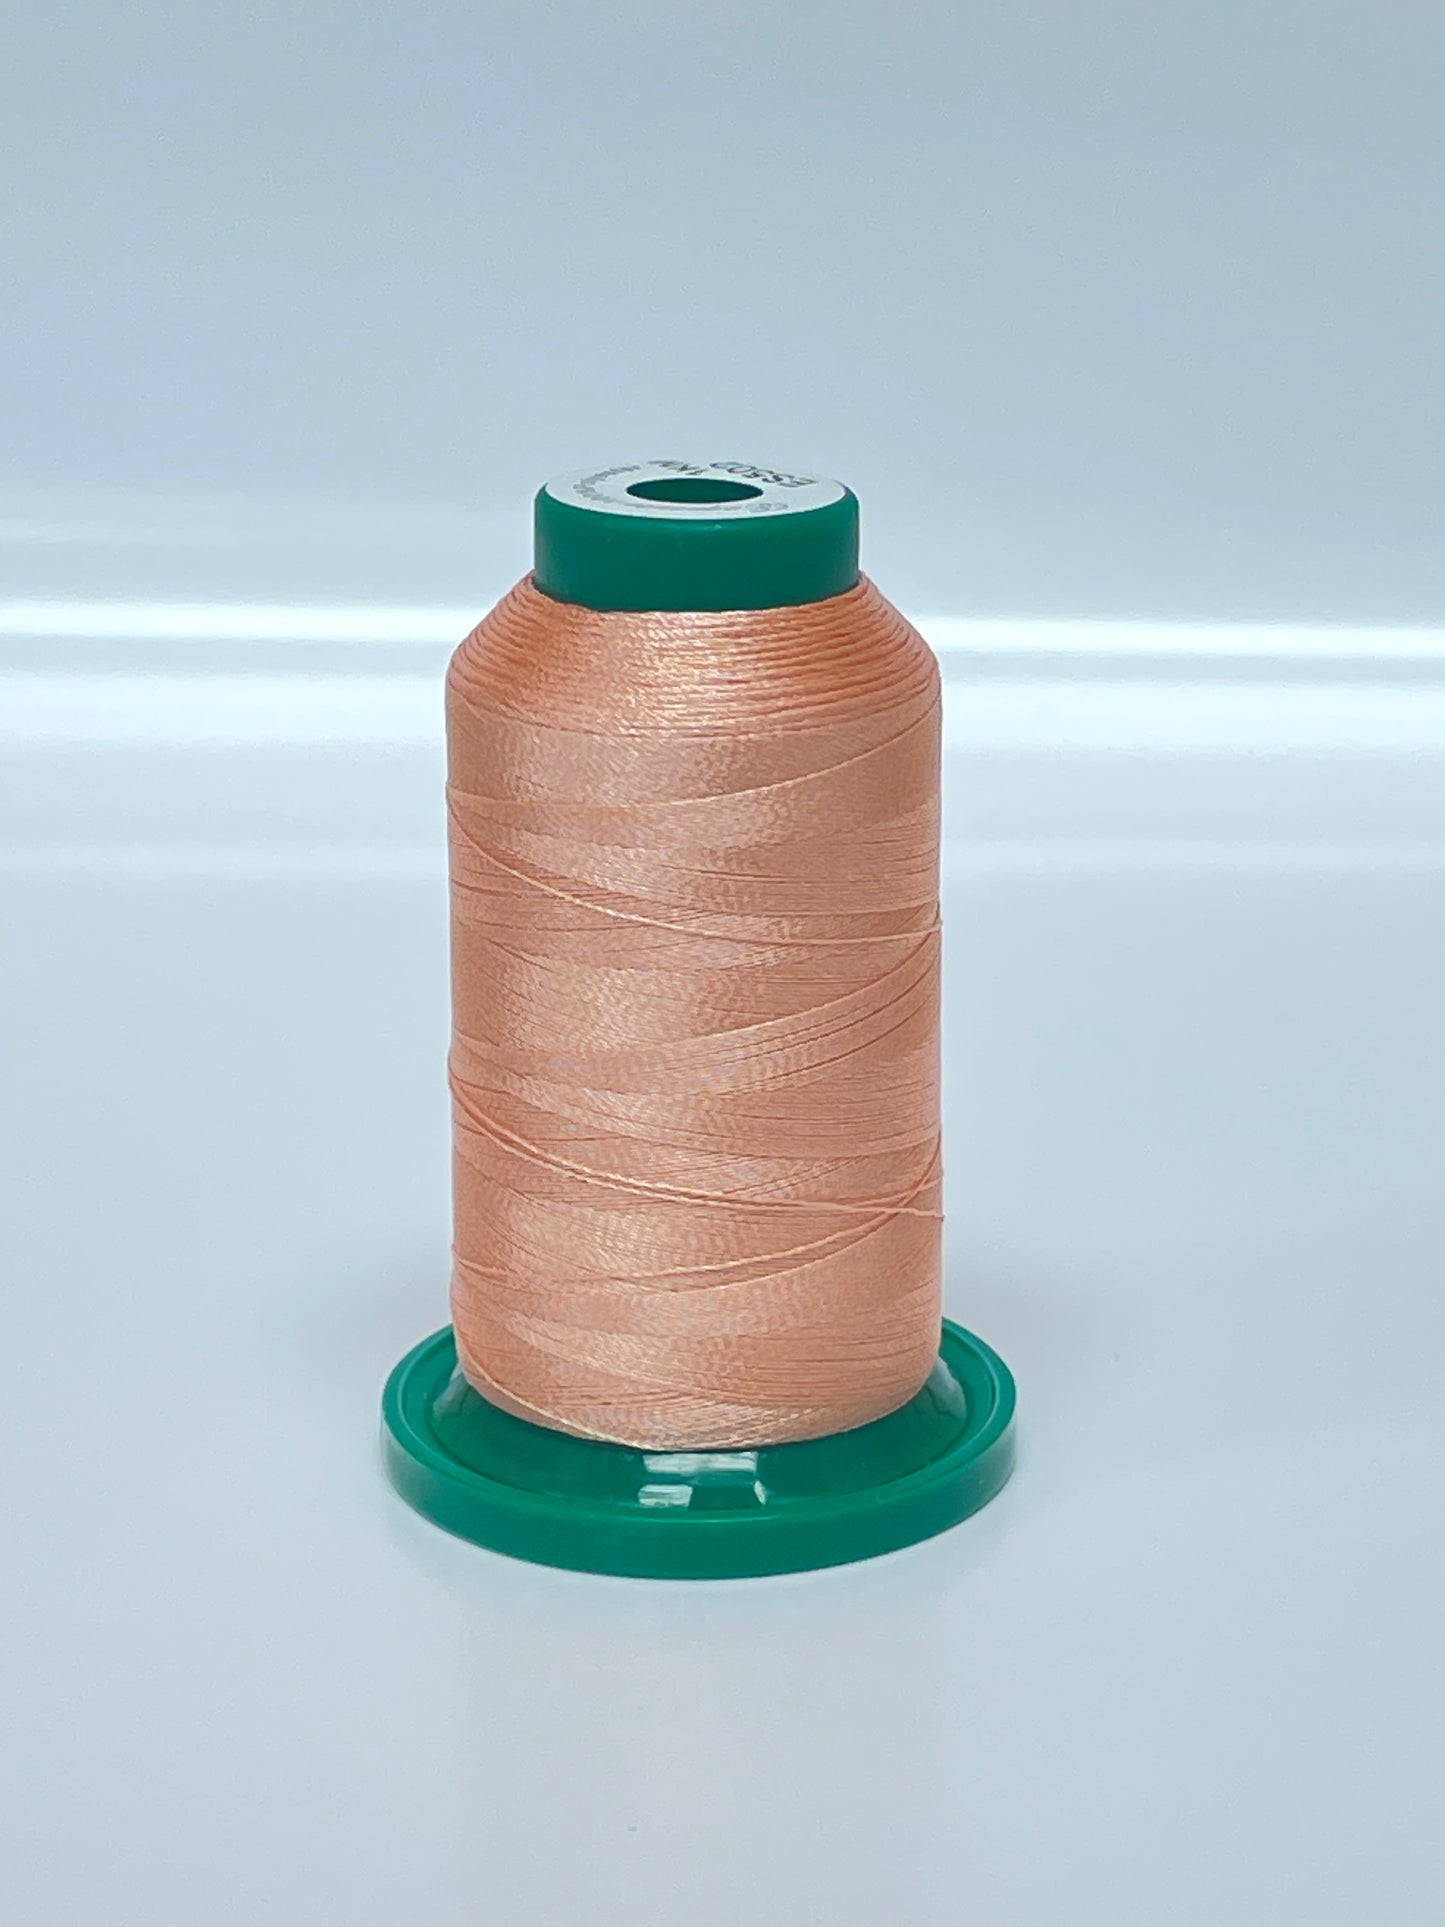 Exquisite Embroidery Thread - Pinks